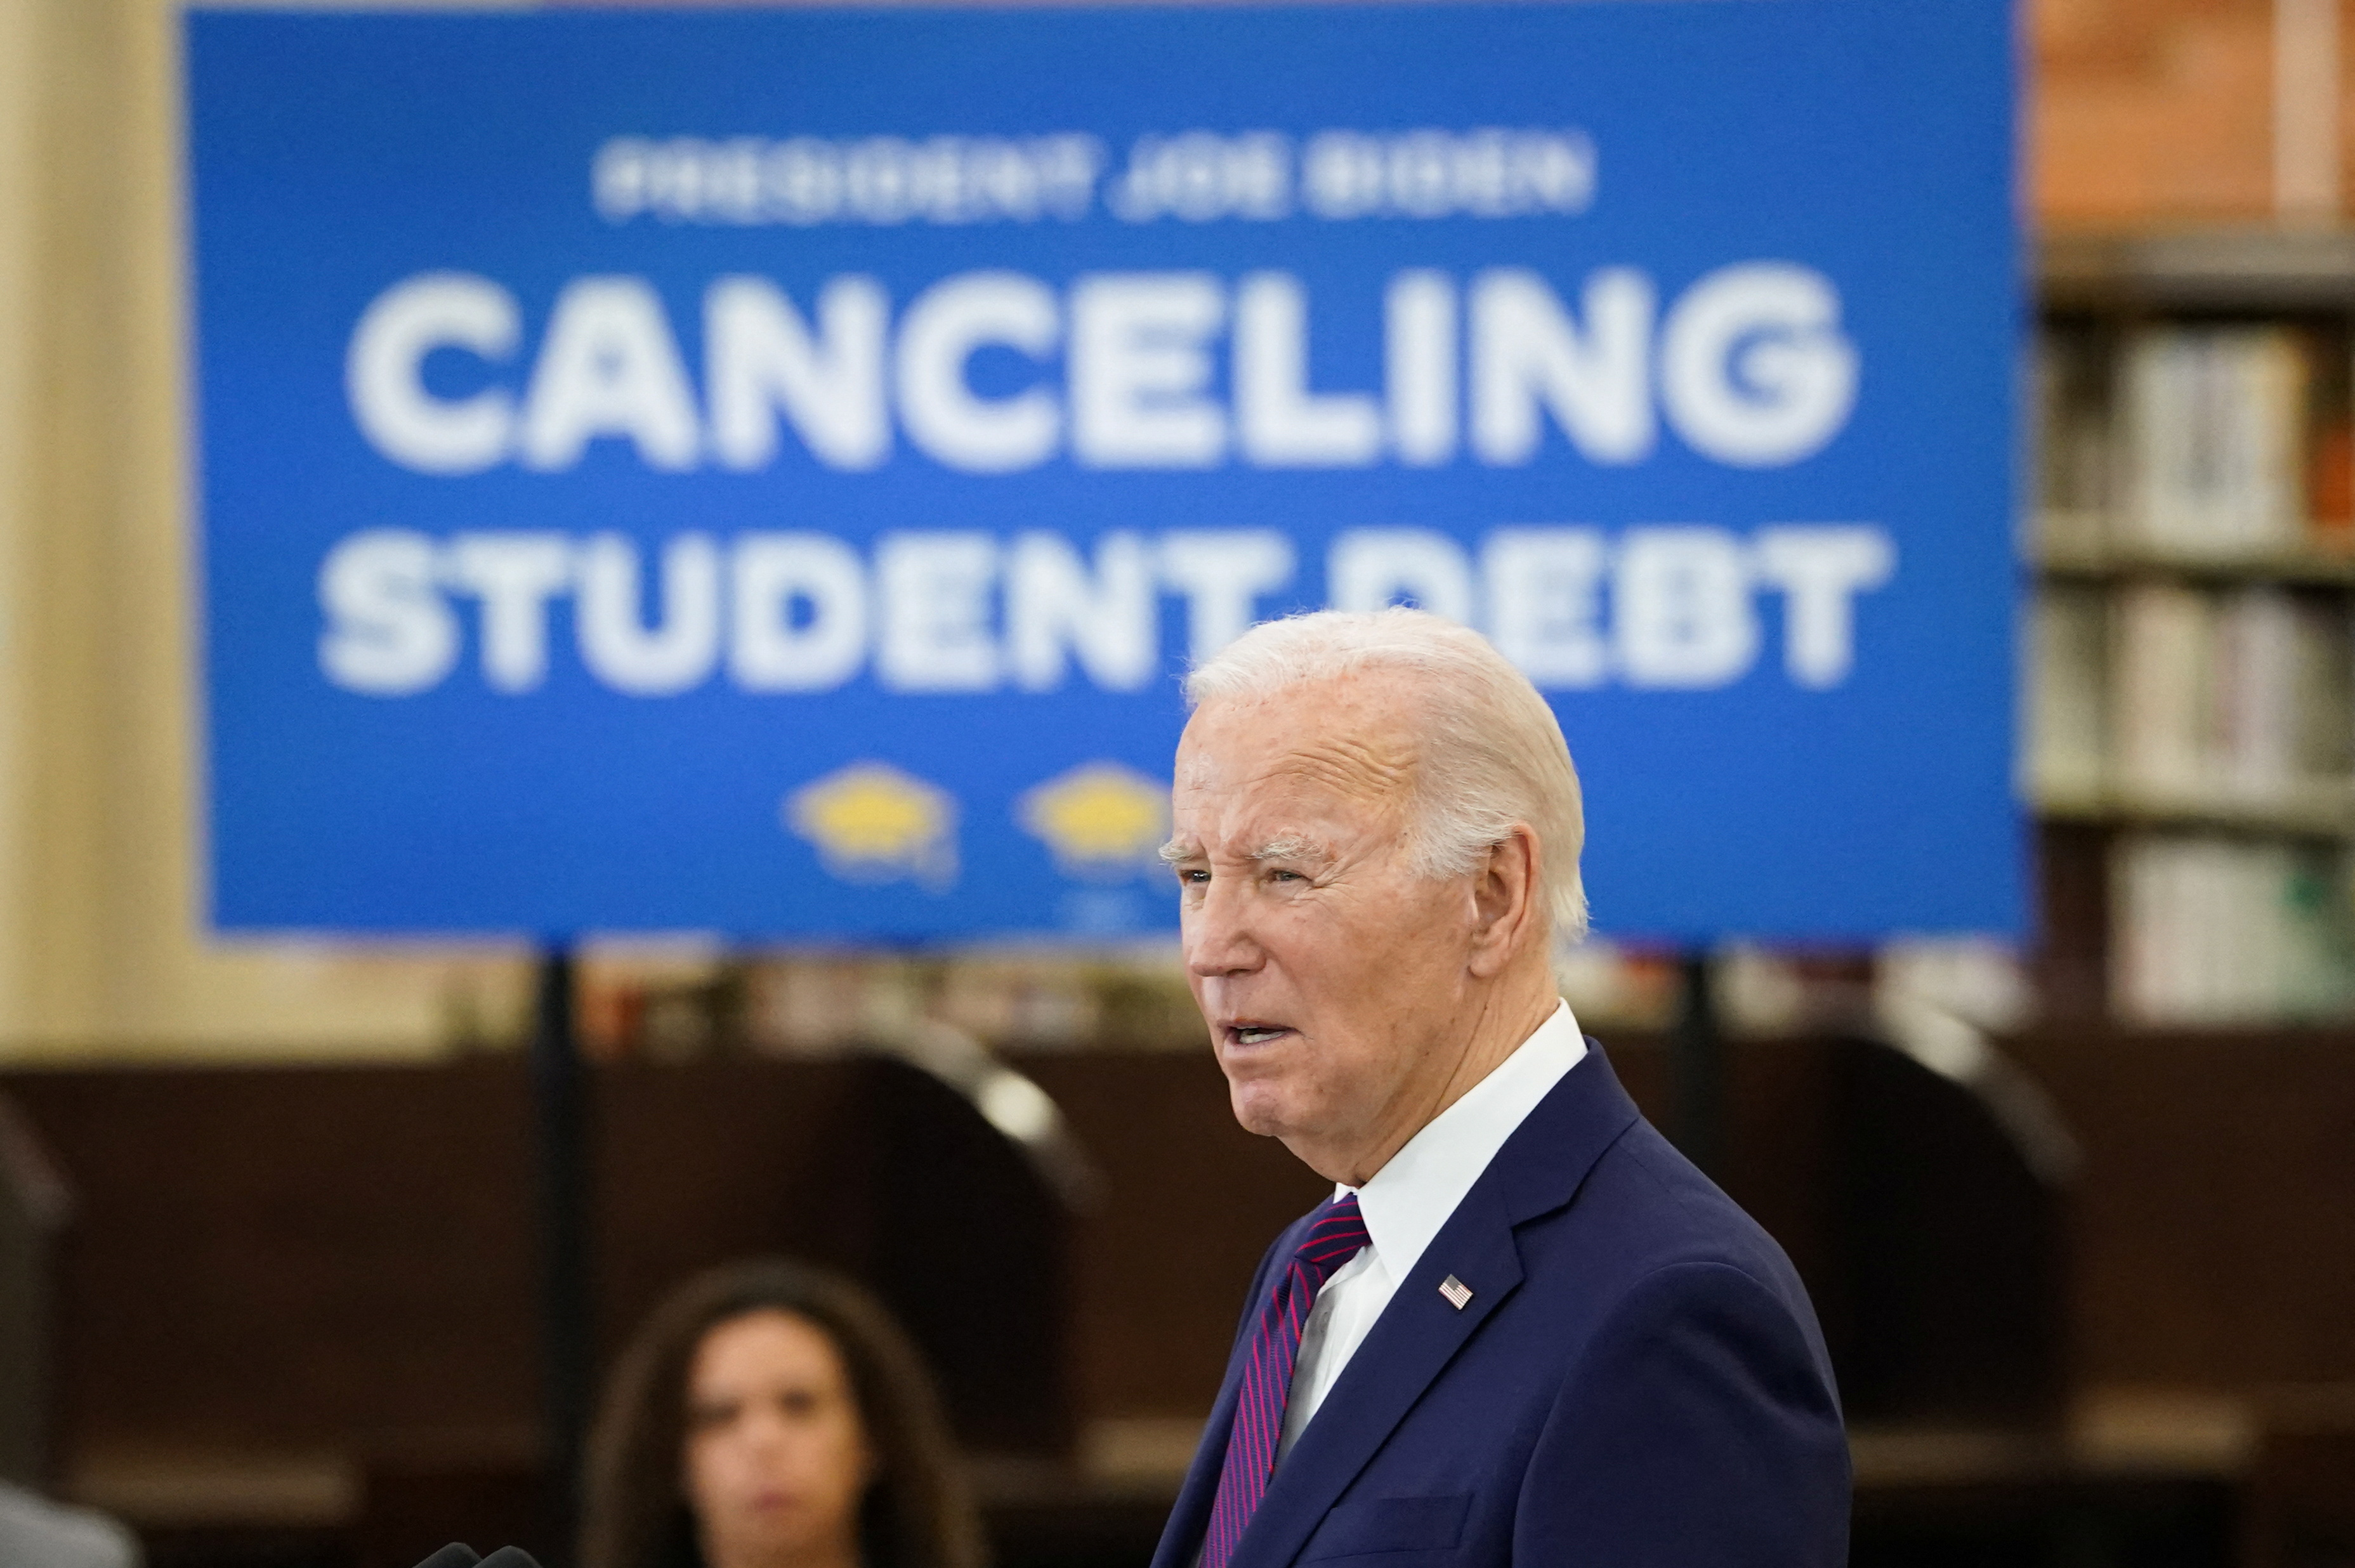 U.S. President Biden delivers remarks at an event in Culver City